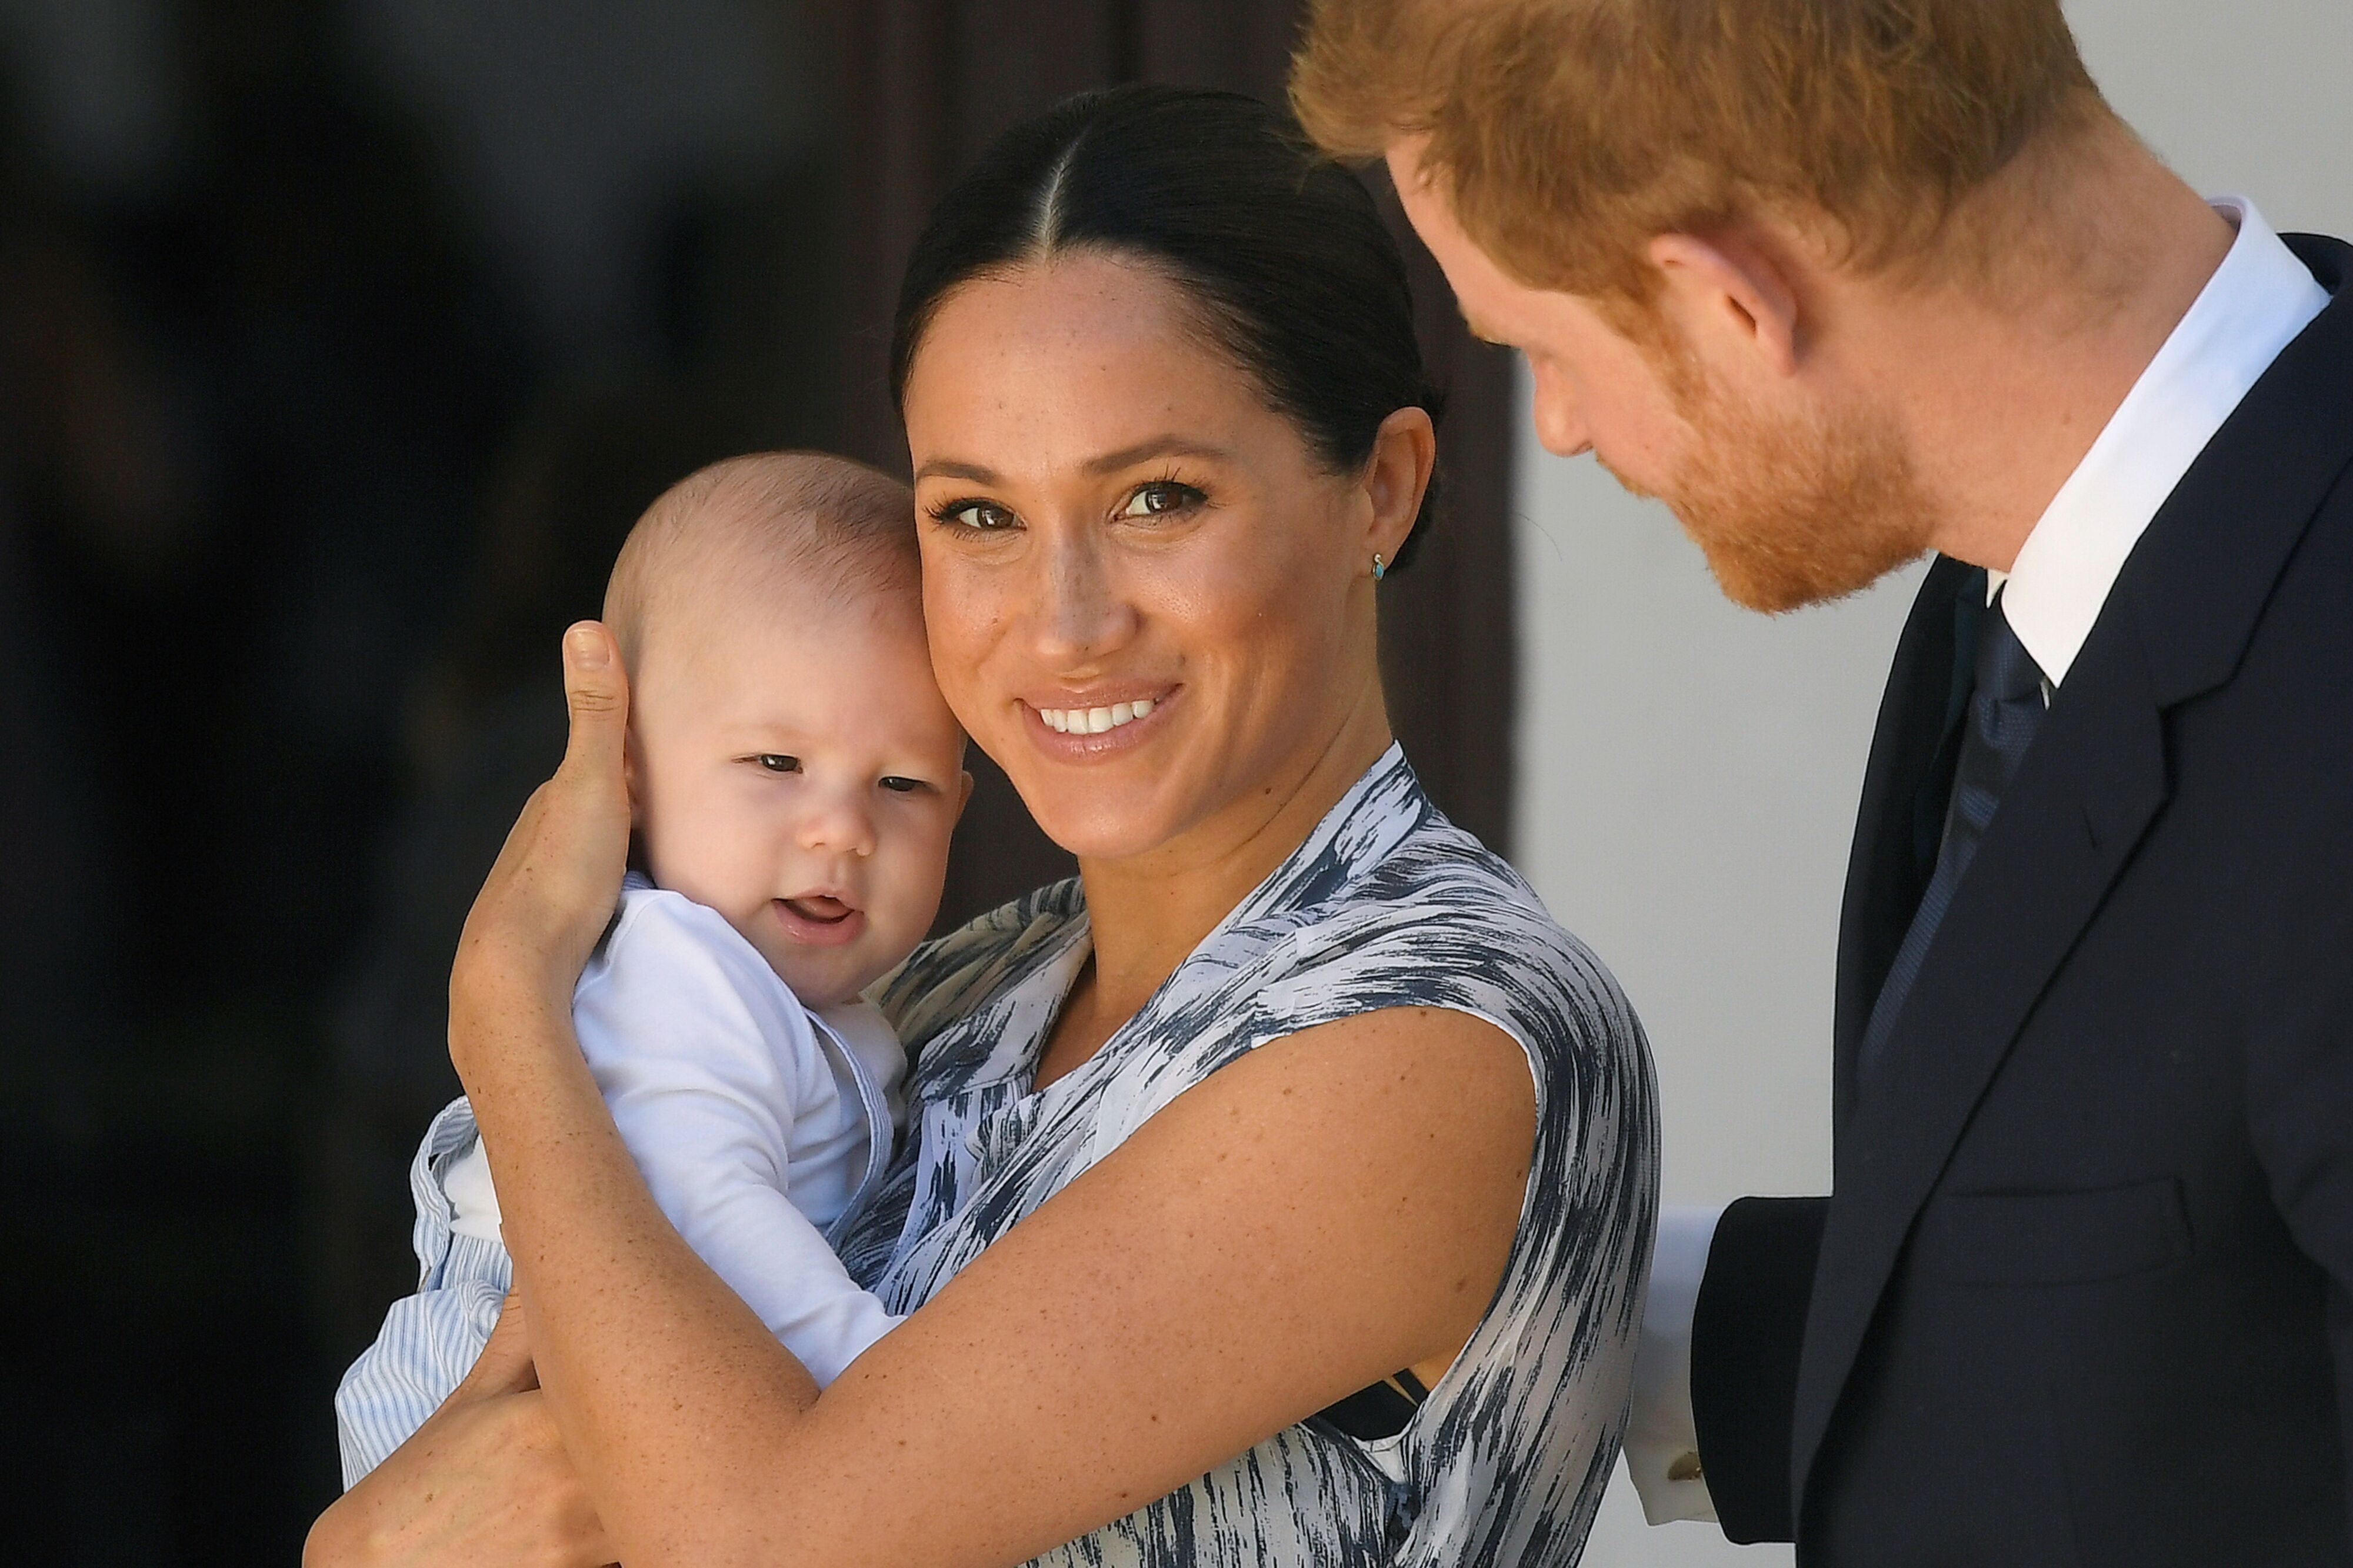 Meghan Markle and Prince Harry and their baby son Archie Mountbatten-Windsor at a meeting with Archbishop Desmond Tutu at the Desmond & Leah Tutu Legacy Foundation during their royal tour of South Africa on September 25, 2019 in Cape Town, South Africa. | Source: Getty Images